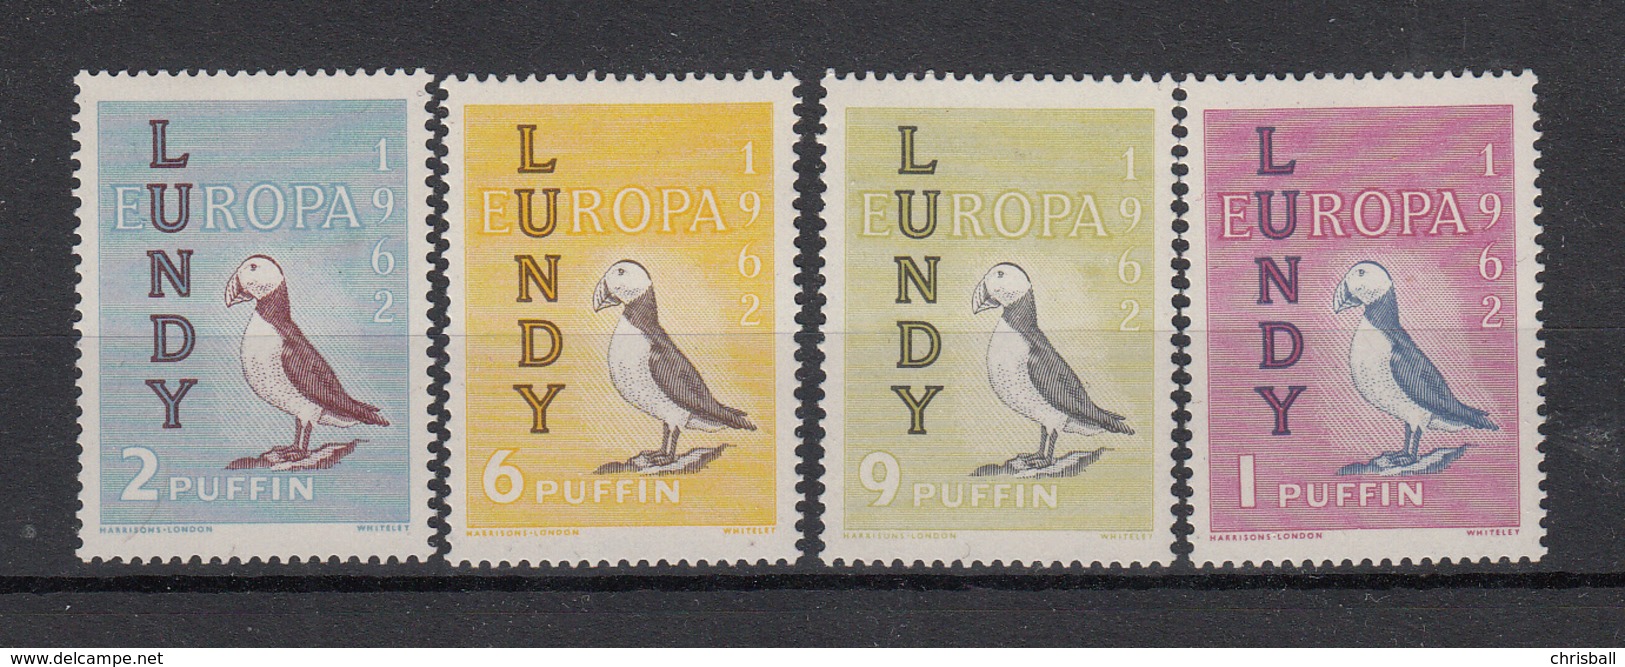 Lundy  - Europa 1962  Mounted Mint - Local Issues